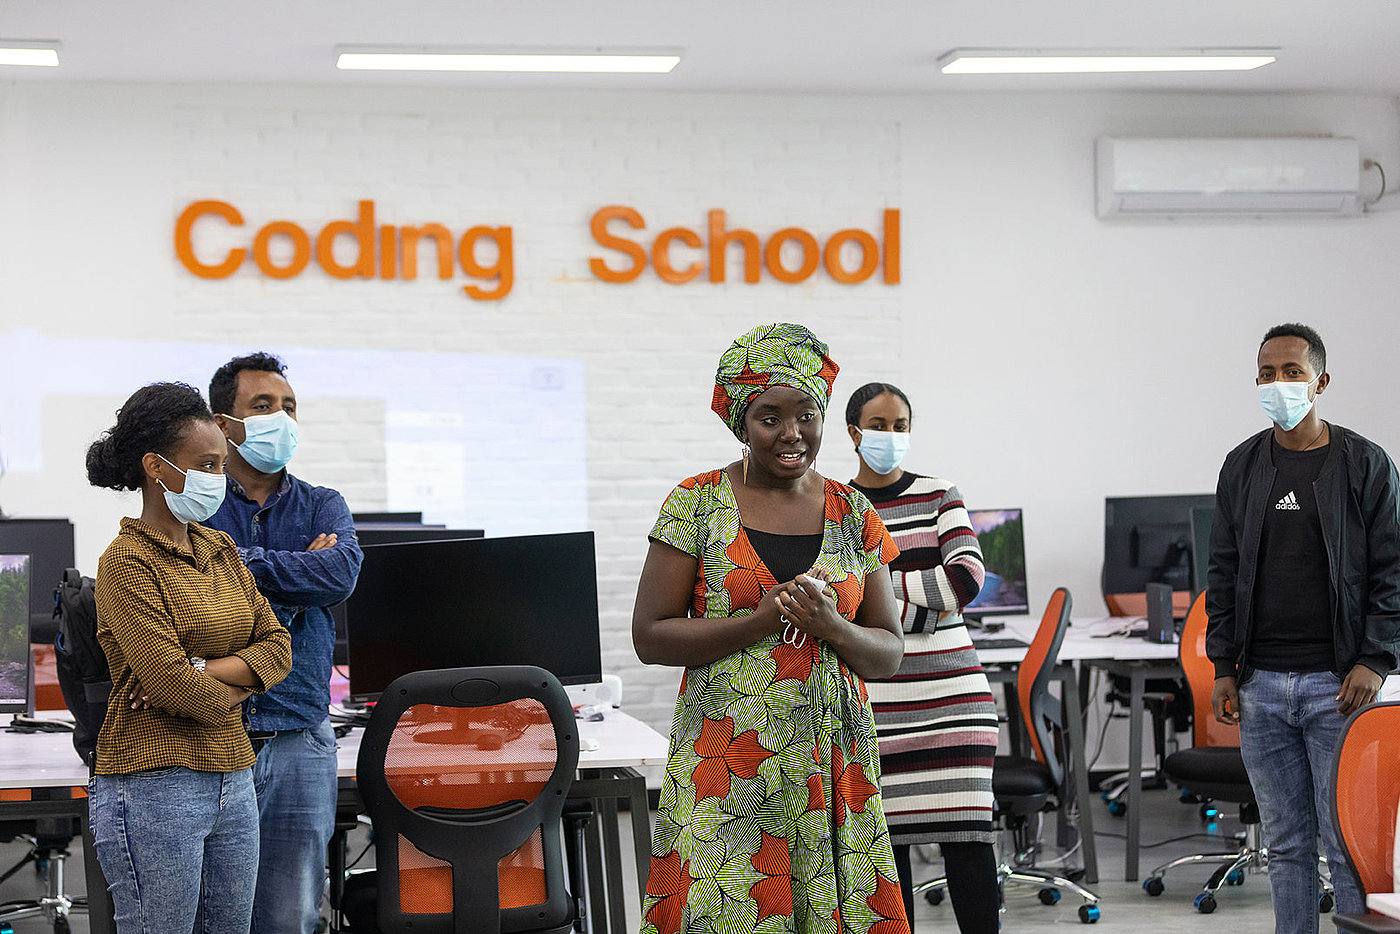 Photo: A woman is standing in the middle of a room and speaking. Other people stand around her in a circle; they are all wearing surgical masks. In the background we can read ‘Coding School’ on the wall.